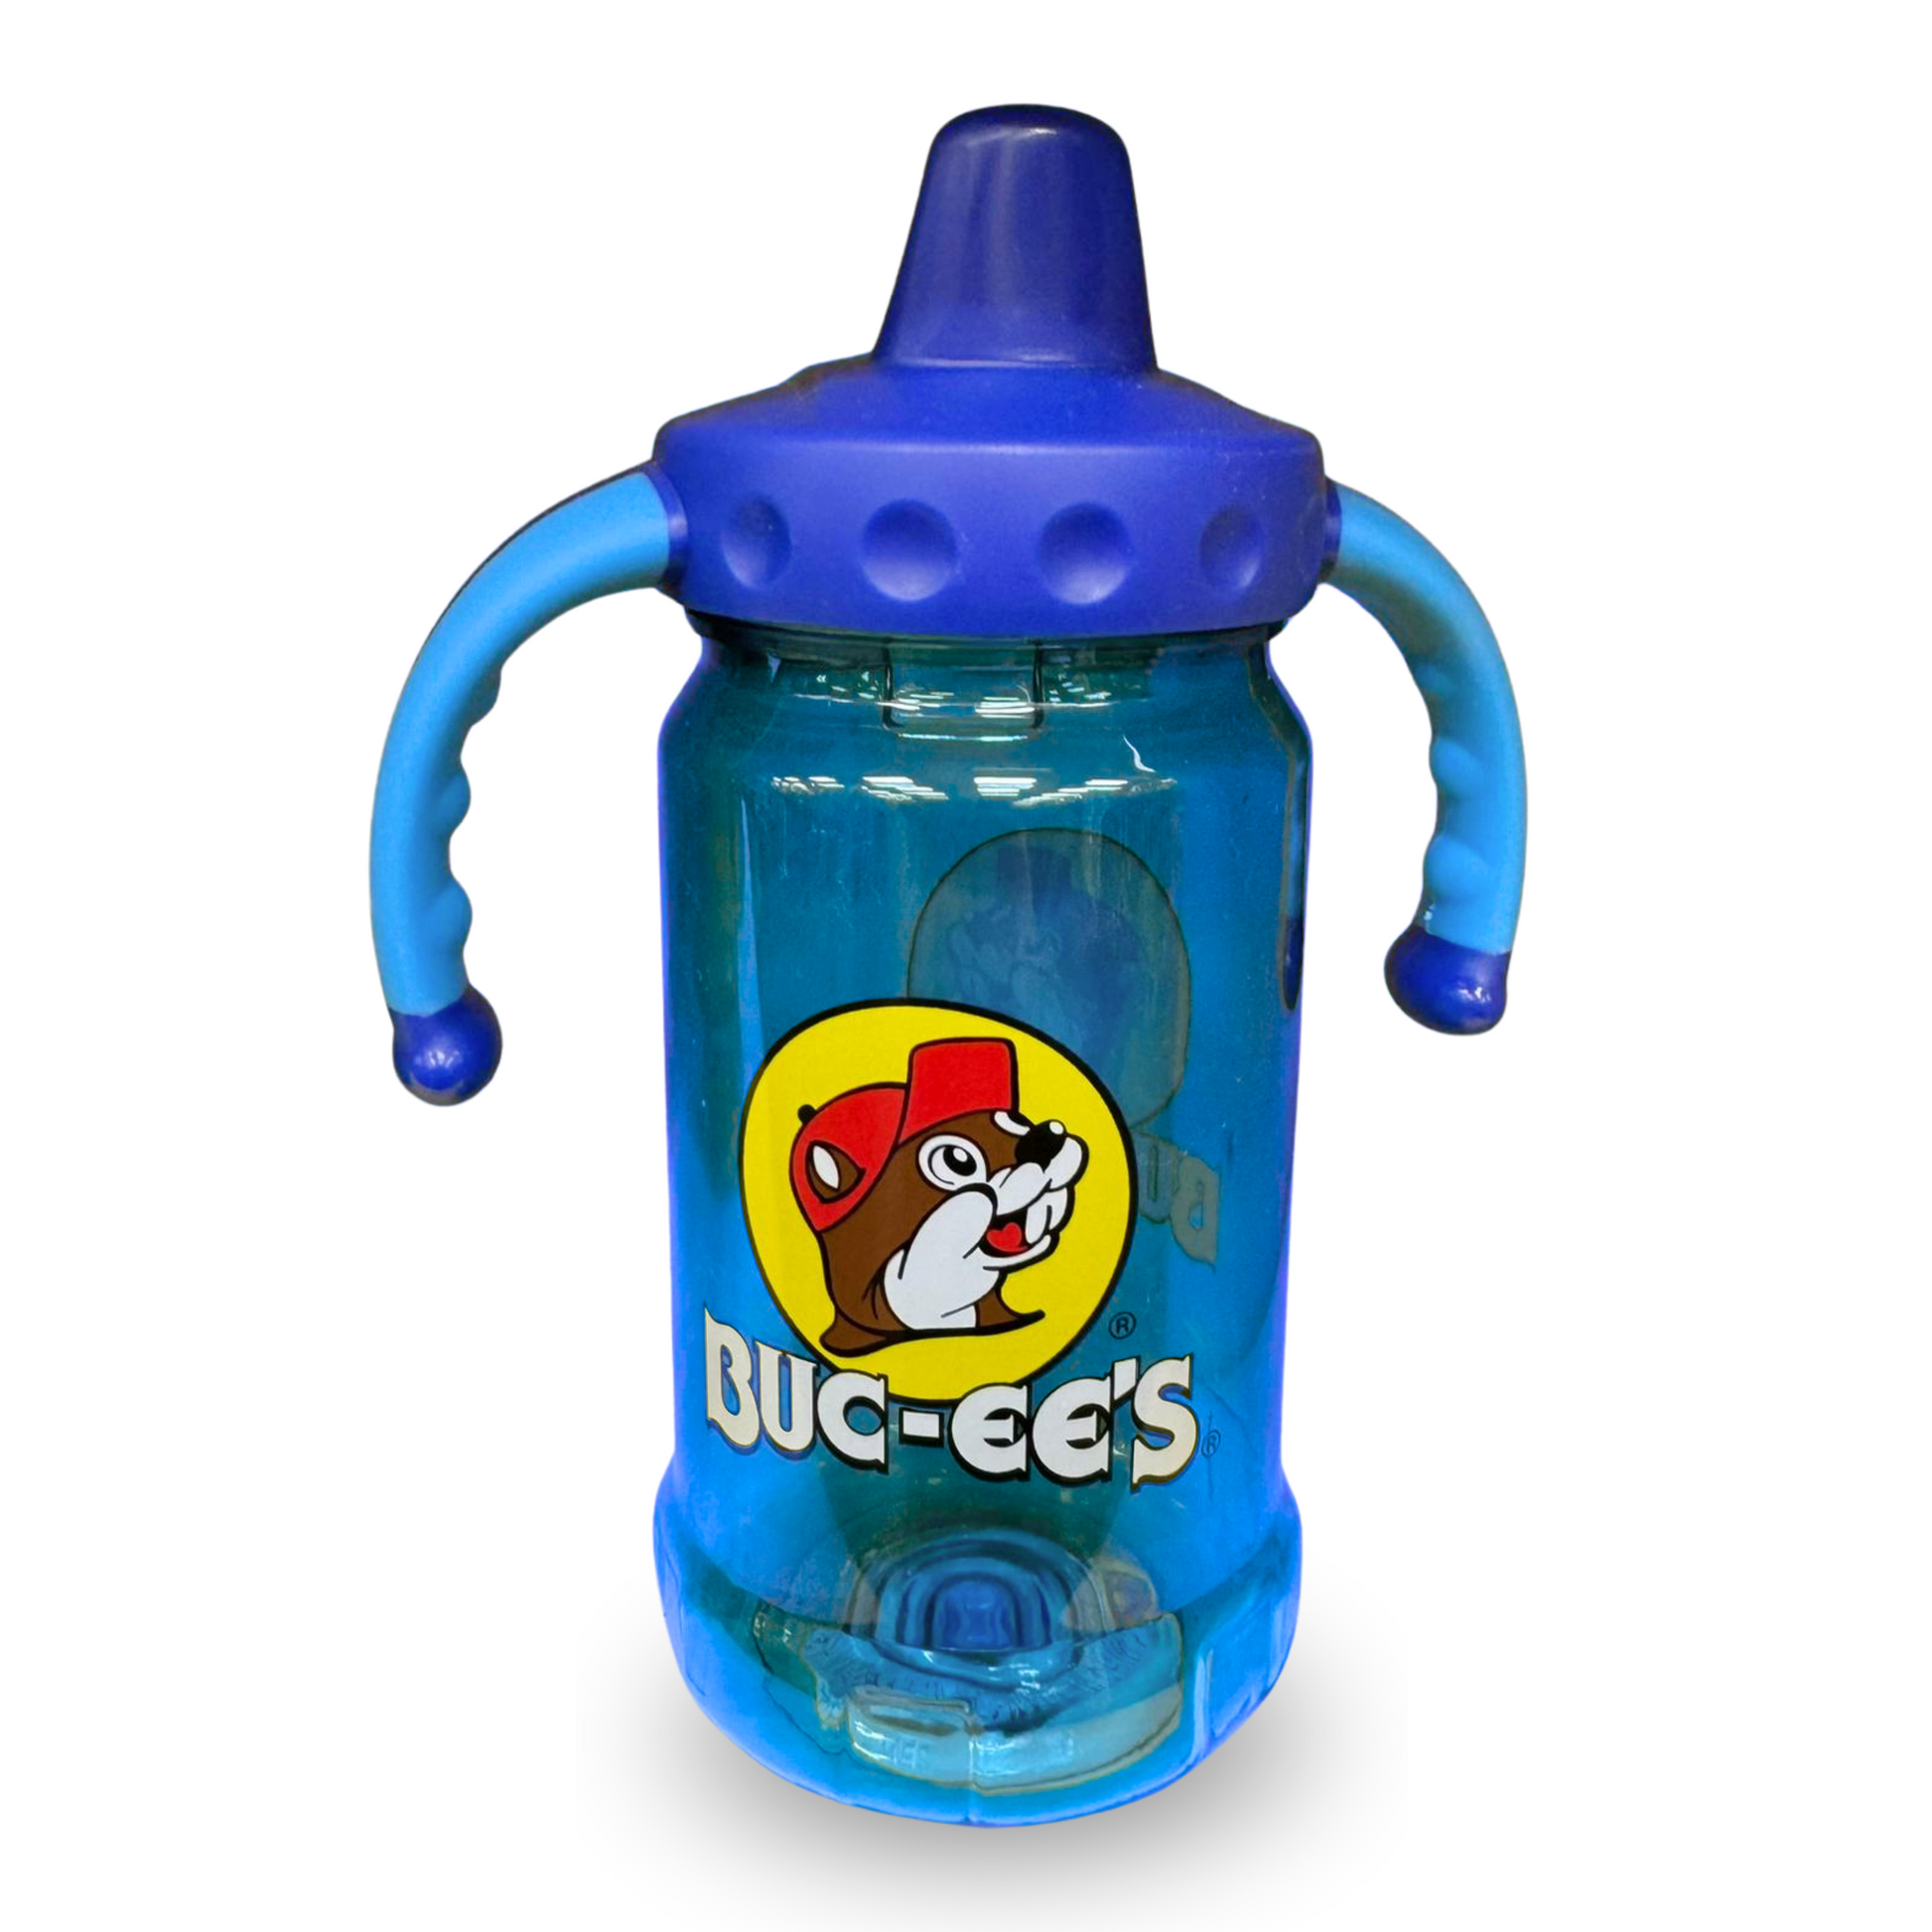 Buc-ee's Spill Proof Sippy Cup with Handles 12oz buc ees buc ee's bucees buccees buc-ees